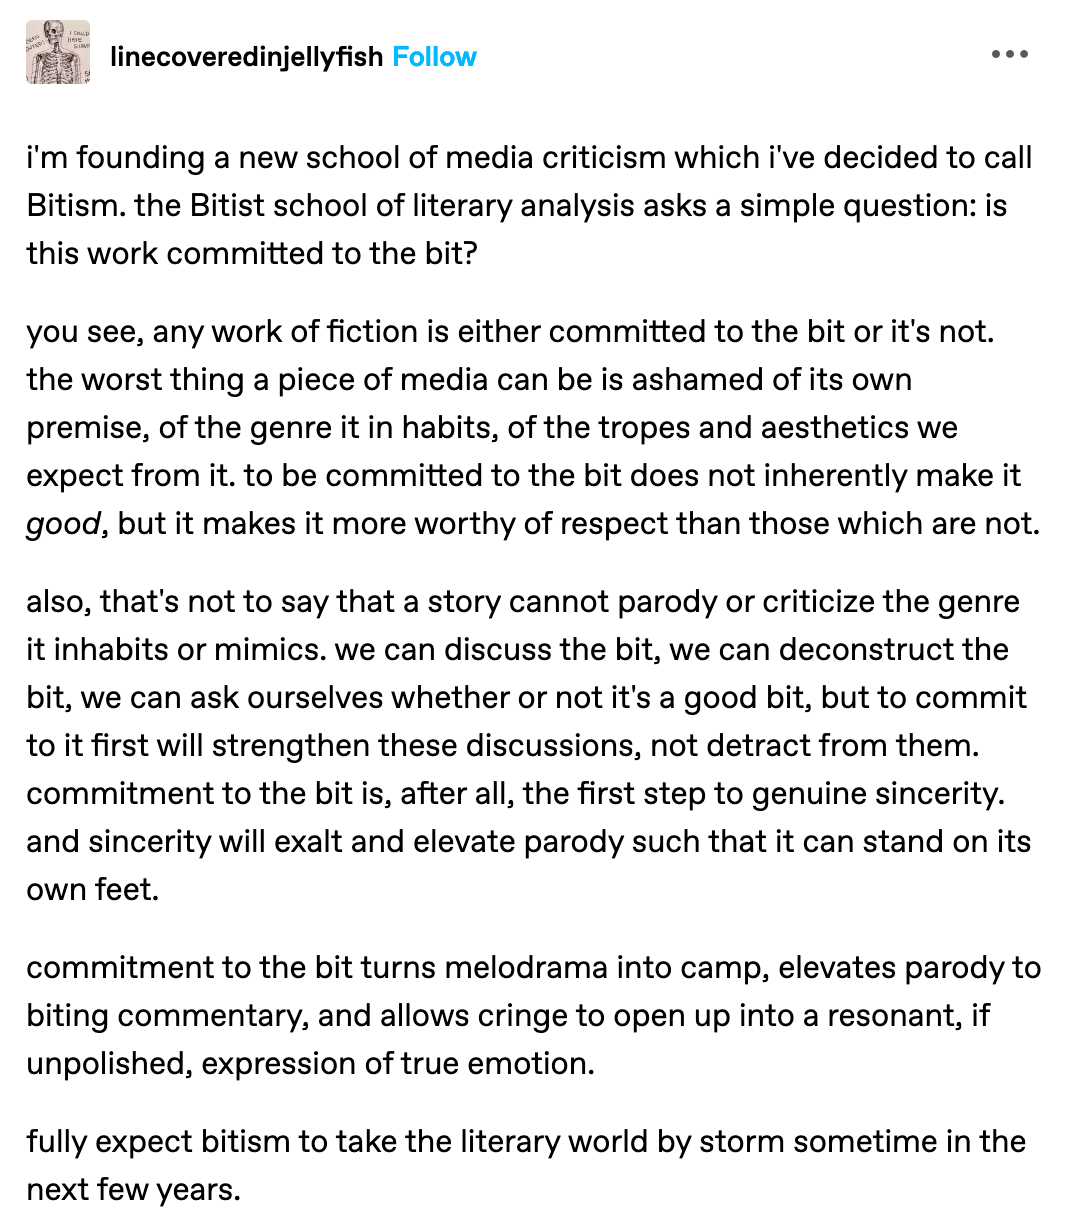 'm founding a new school of media criticism which i've decided to call Bitism. the Bitist school of literary analysis asks a simple question: is this work committed to the bit?  you see, any work of fiction is either committed to the bit or it's not. the worst thing a piece of media can be is ashamed of its own premise, of the genre it in habits, of the tropes and aesthetics we expect from it. to be committed to the bit does not inherently make it good, but it makes it more worthy of respect than those which are not.   also, that's not to say that a story cannot parody or criticize the genre it inhabits or mimics. we can discuss the bit, we can deconstruct the bit, we can ask ourselves whether or not it's a good bit, but to commit to it first will strengthen these discussions, not detract from them. commitment to the bit is, after all, the first step to genuine sincerity. and sincerity will exalt and elevate parody such that it can stand on its own feet.   commitment to the bit turns melodrama into camp, elevates parody to biting commentary, and allows cringe to open up into a resonant, if unpolished, expression of true emotion.   fully expect bitism to take the literary world by storm sometime in the next few years. (by linecoveredinjellyfish on tumblr)